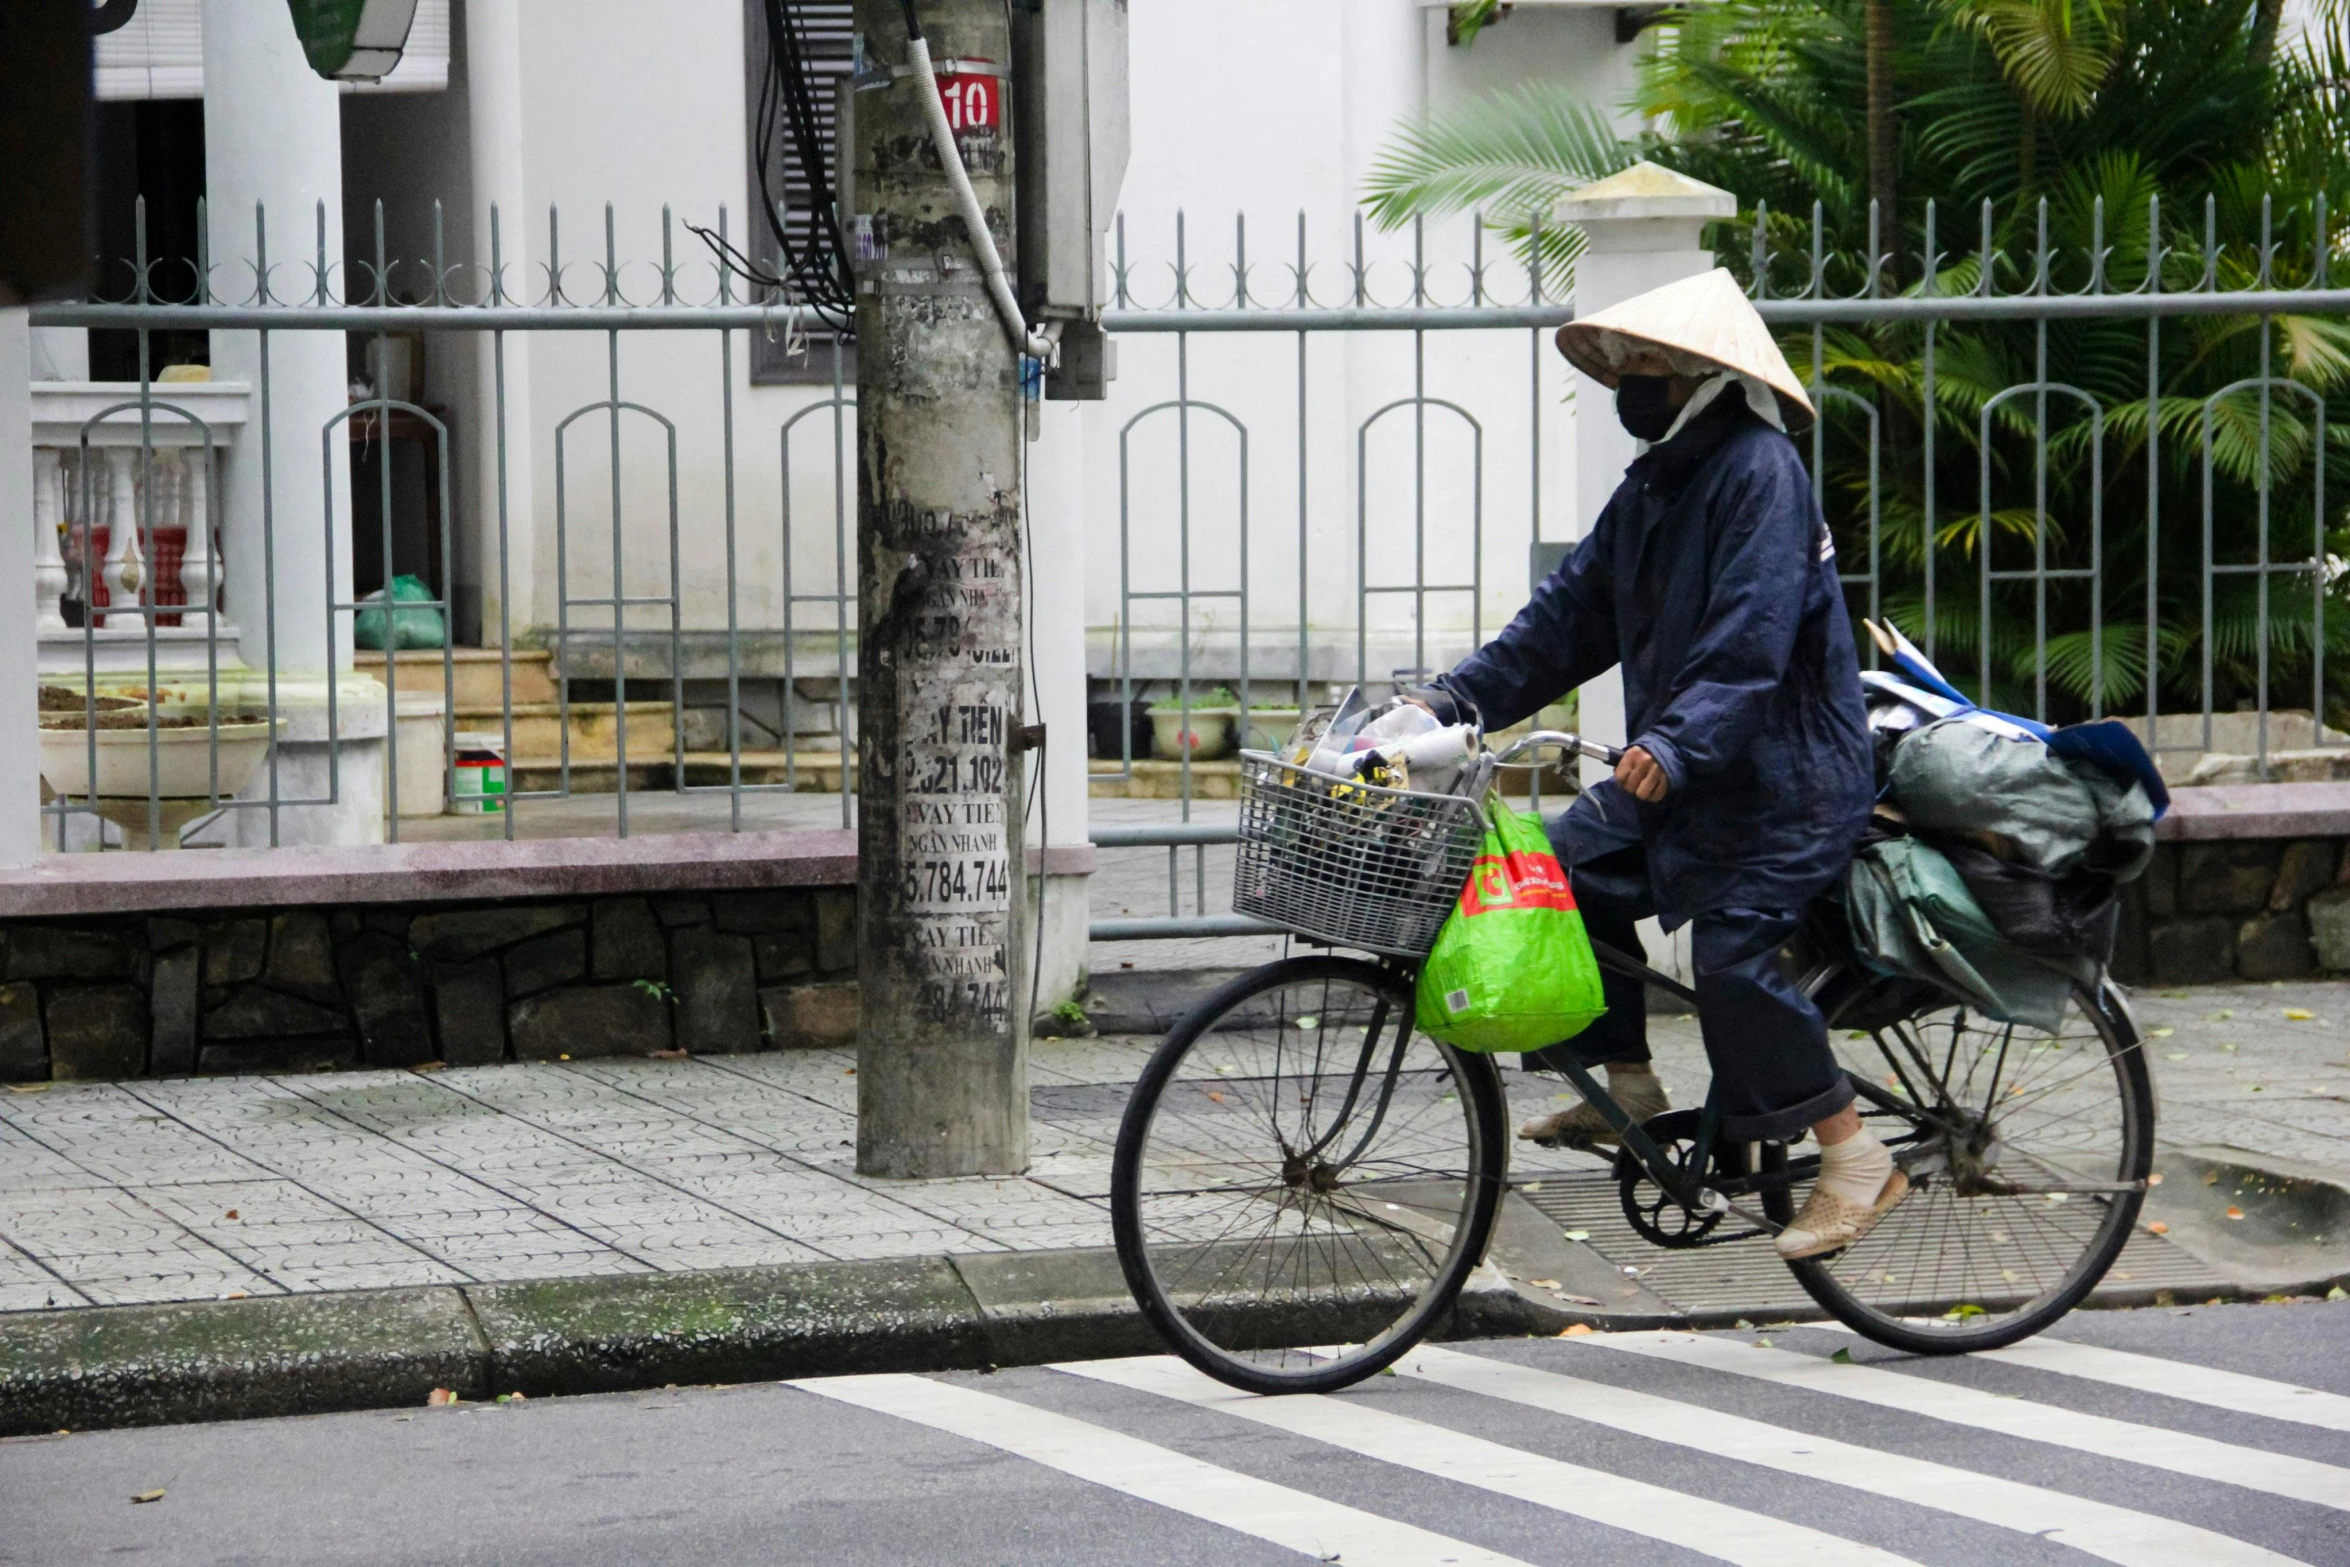 an asian man rides a bicycle with groceries in a basket